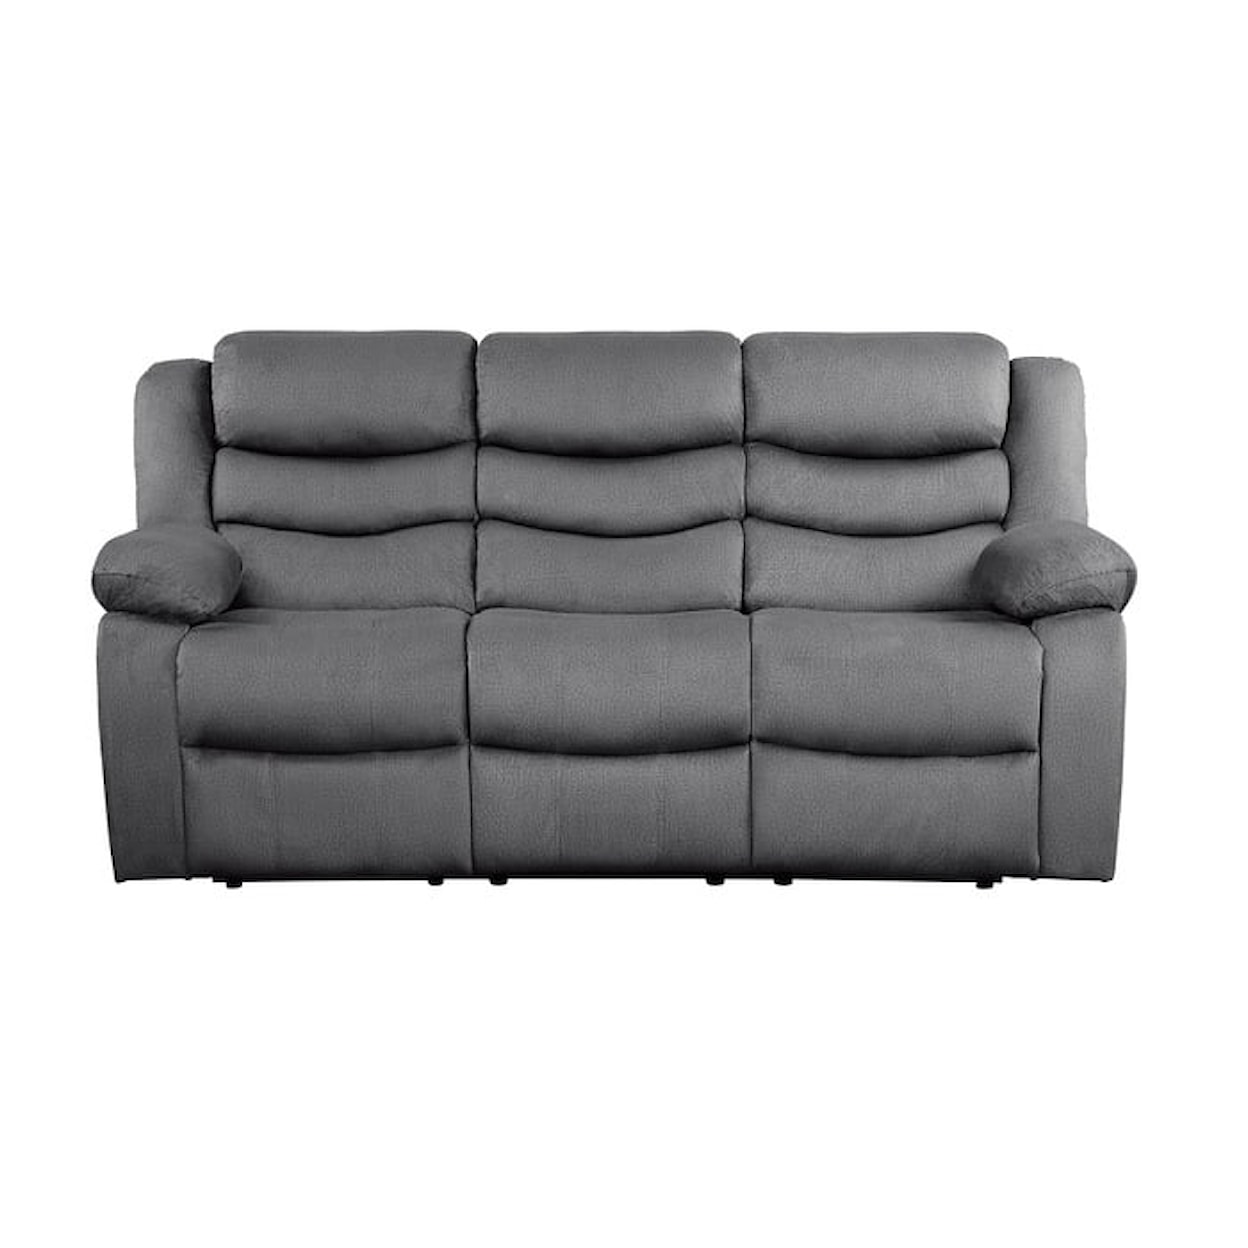 Homelegance Discus Double Reclining Sofa